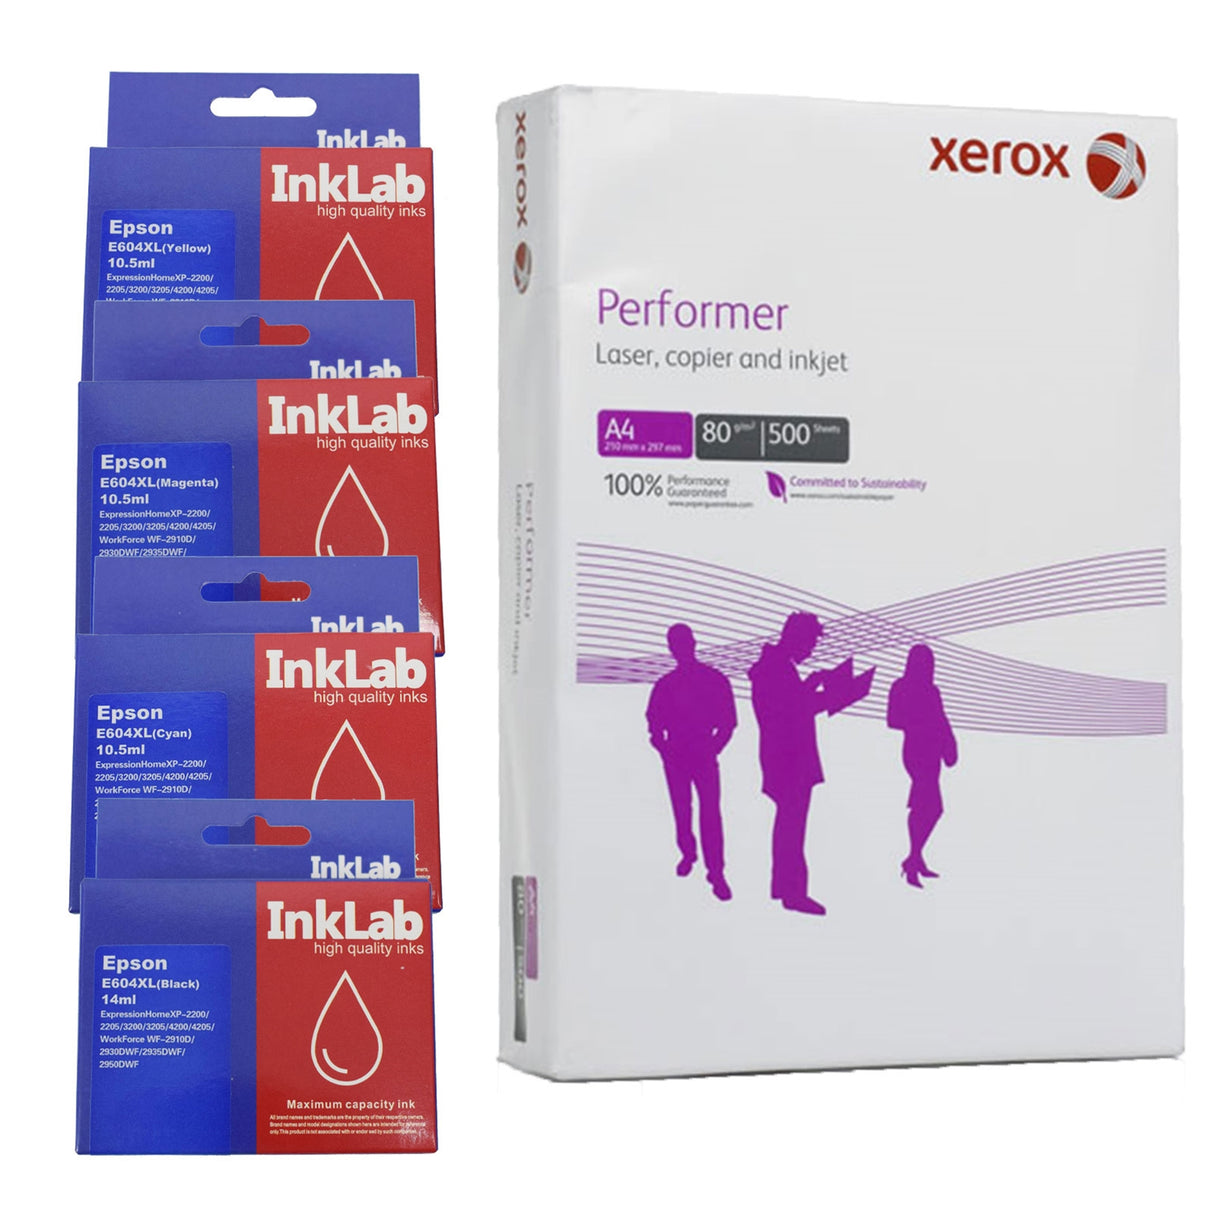 InkLab 604 Ink Bundle, Replacement Inks (Yellow, Cyan, Magenta and Black) with 1 Ream of Xerox Performer A4 80GSM Office Paper